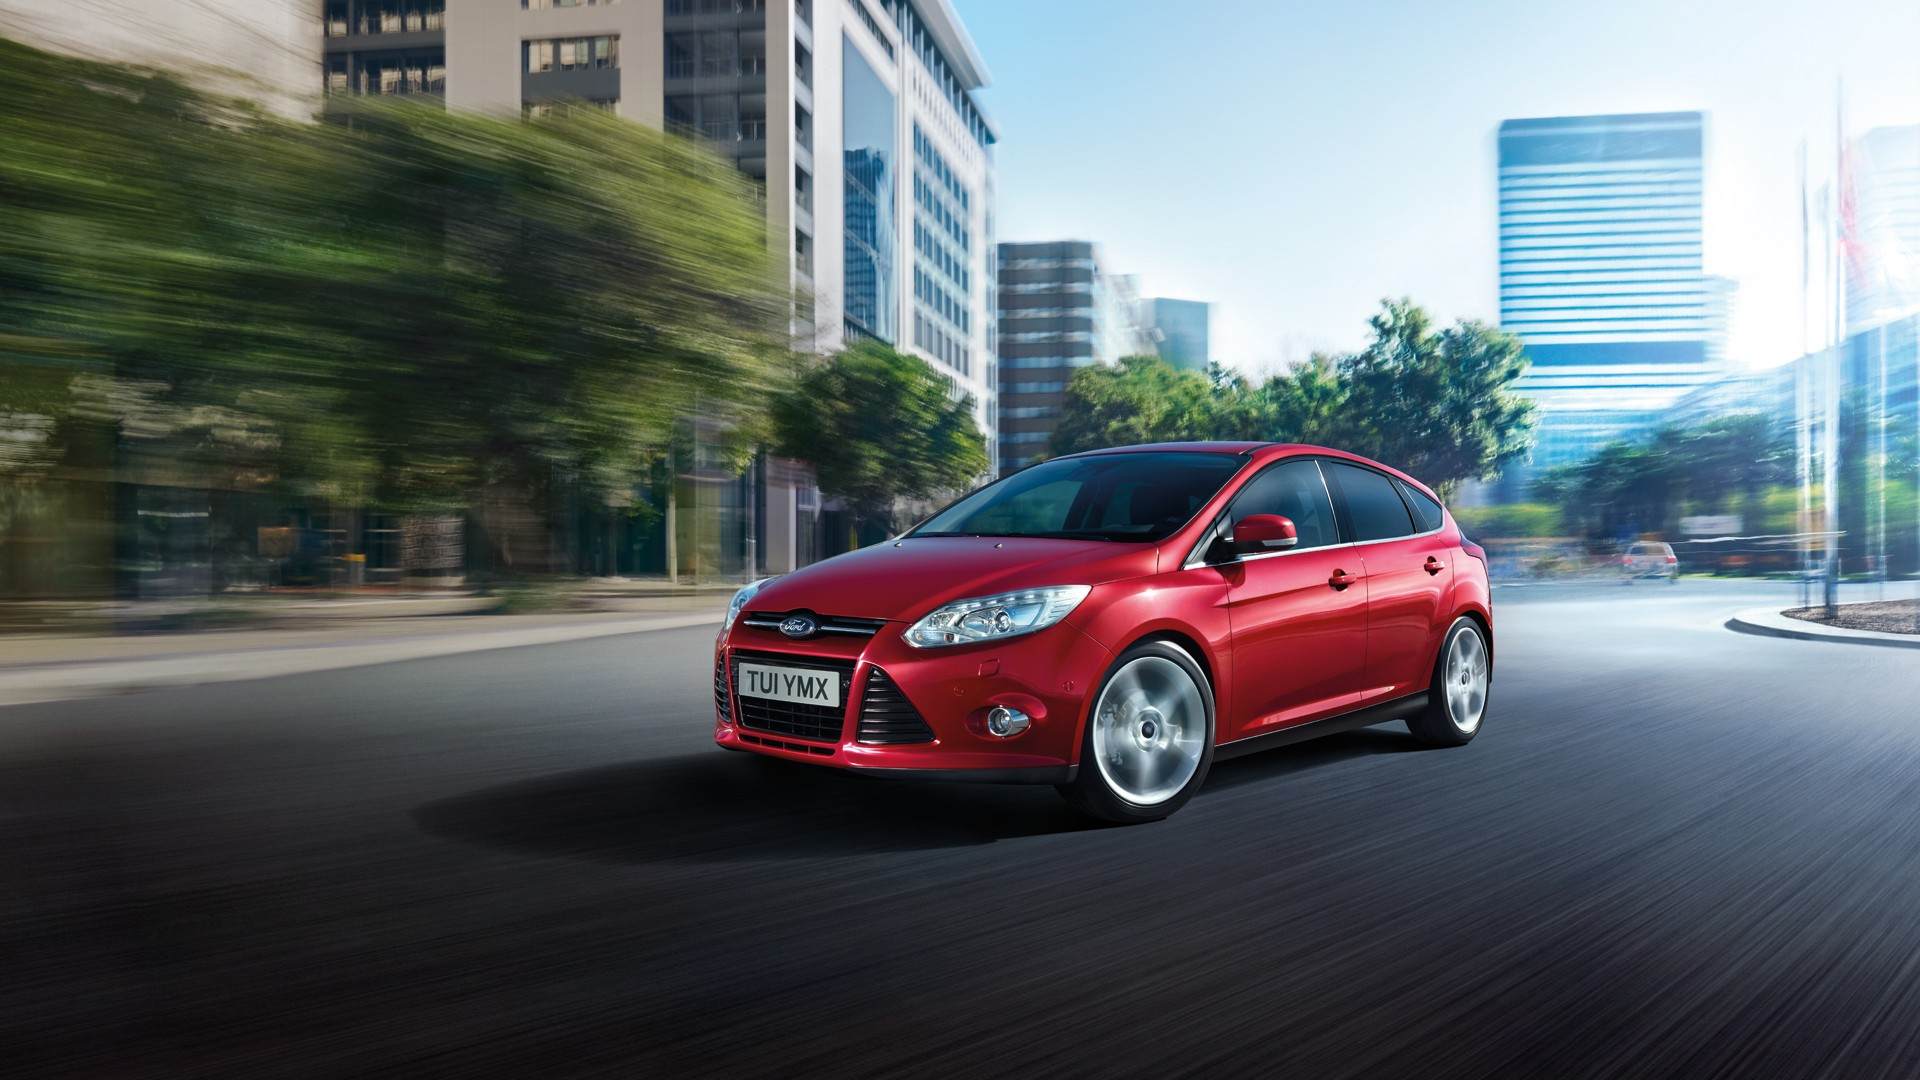 Ford Focus wallpaper HD free download